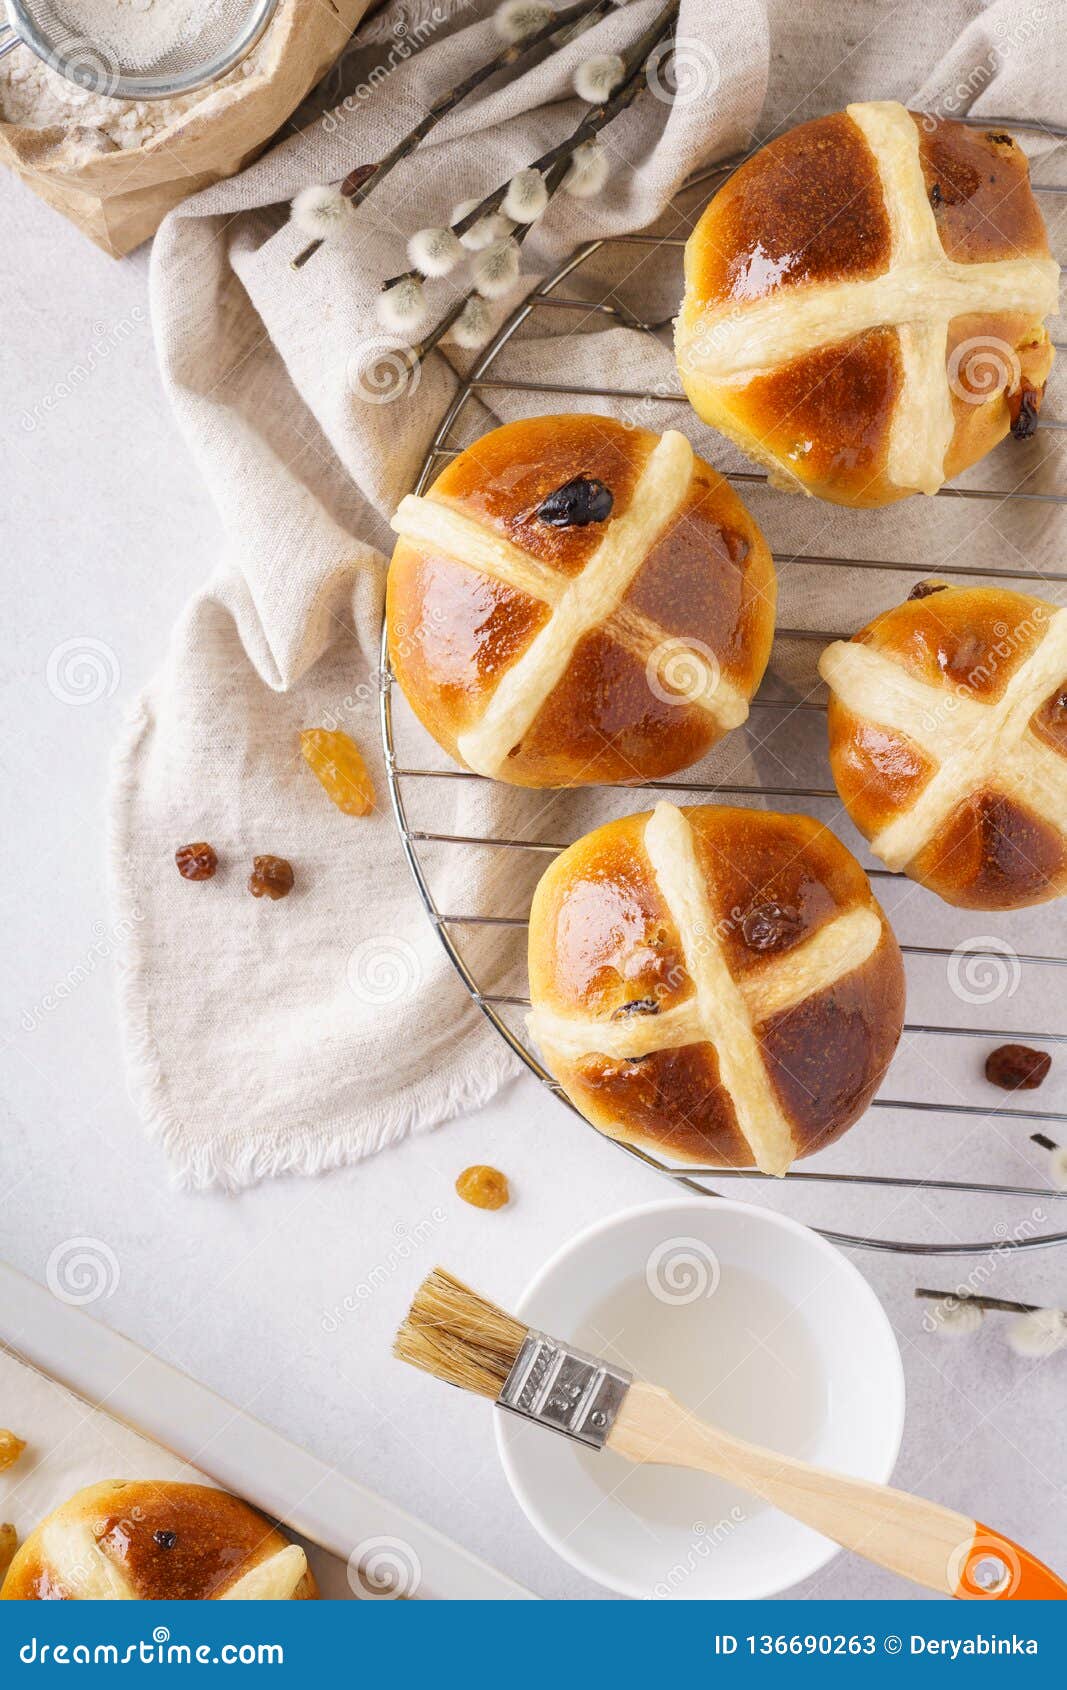 Traditional Hot Cross Buns and Ingredients for Easter Stock Image ...